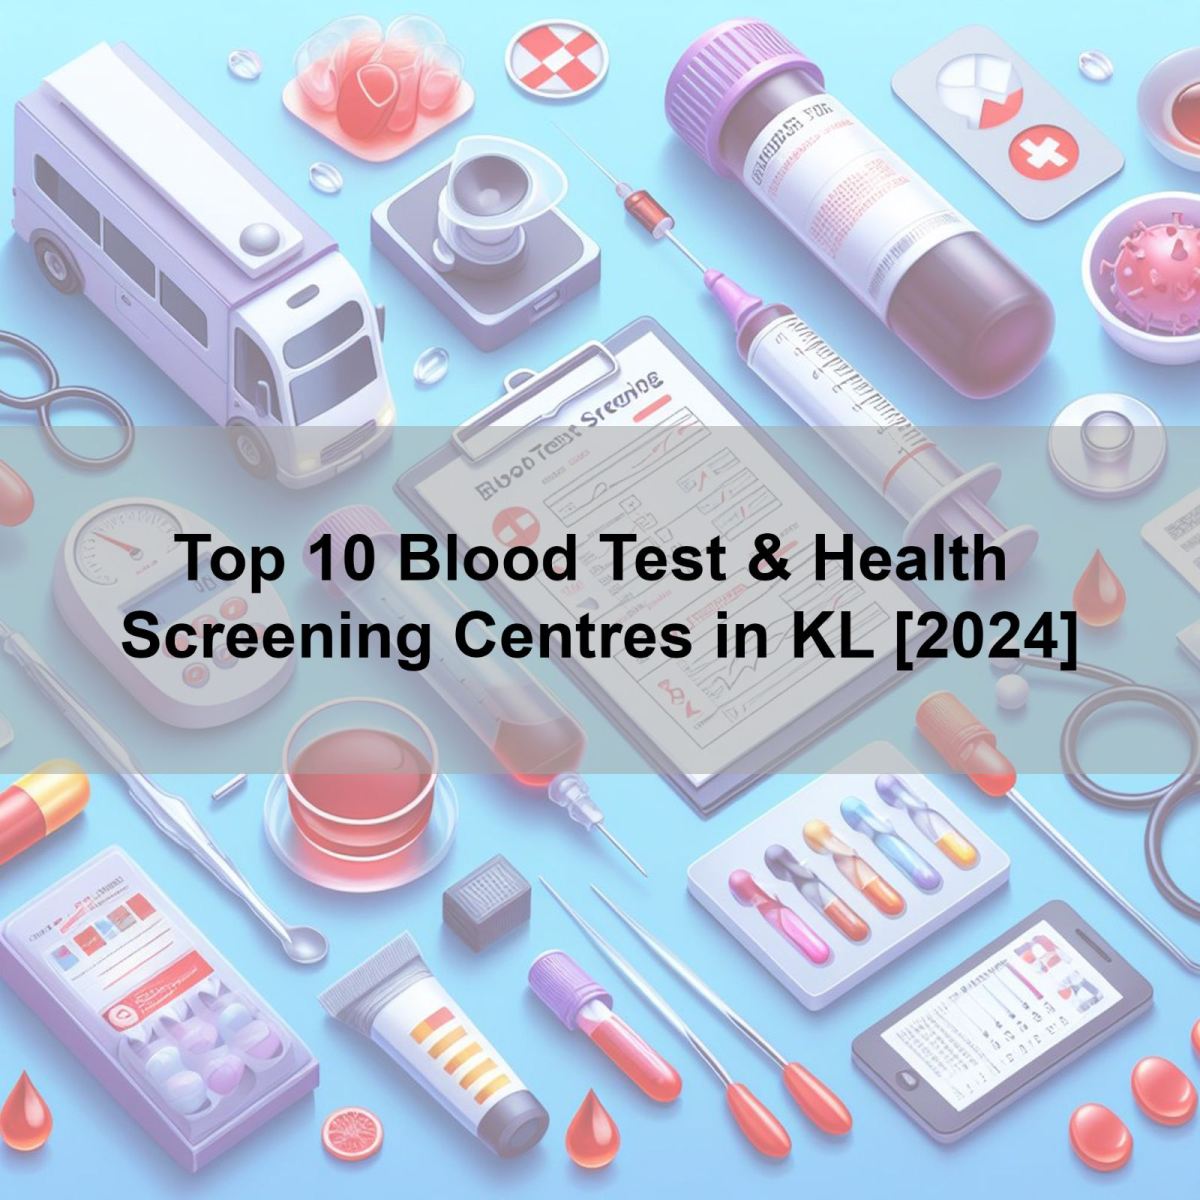 Top 10 Blood Test & Health Screening Centres in KL [2024]